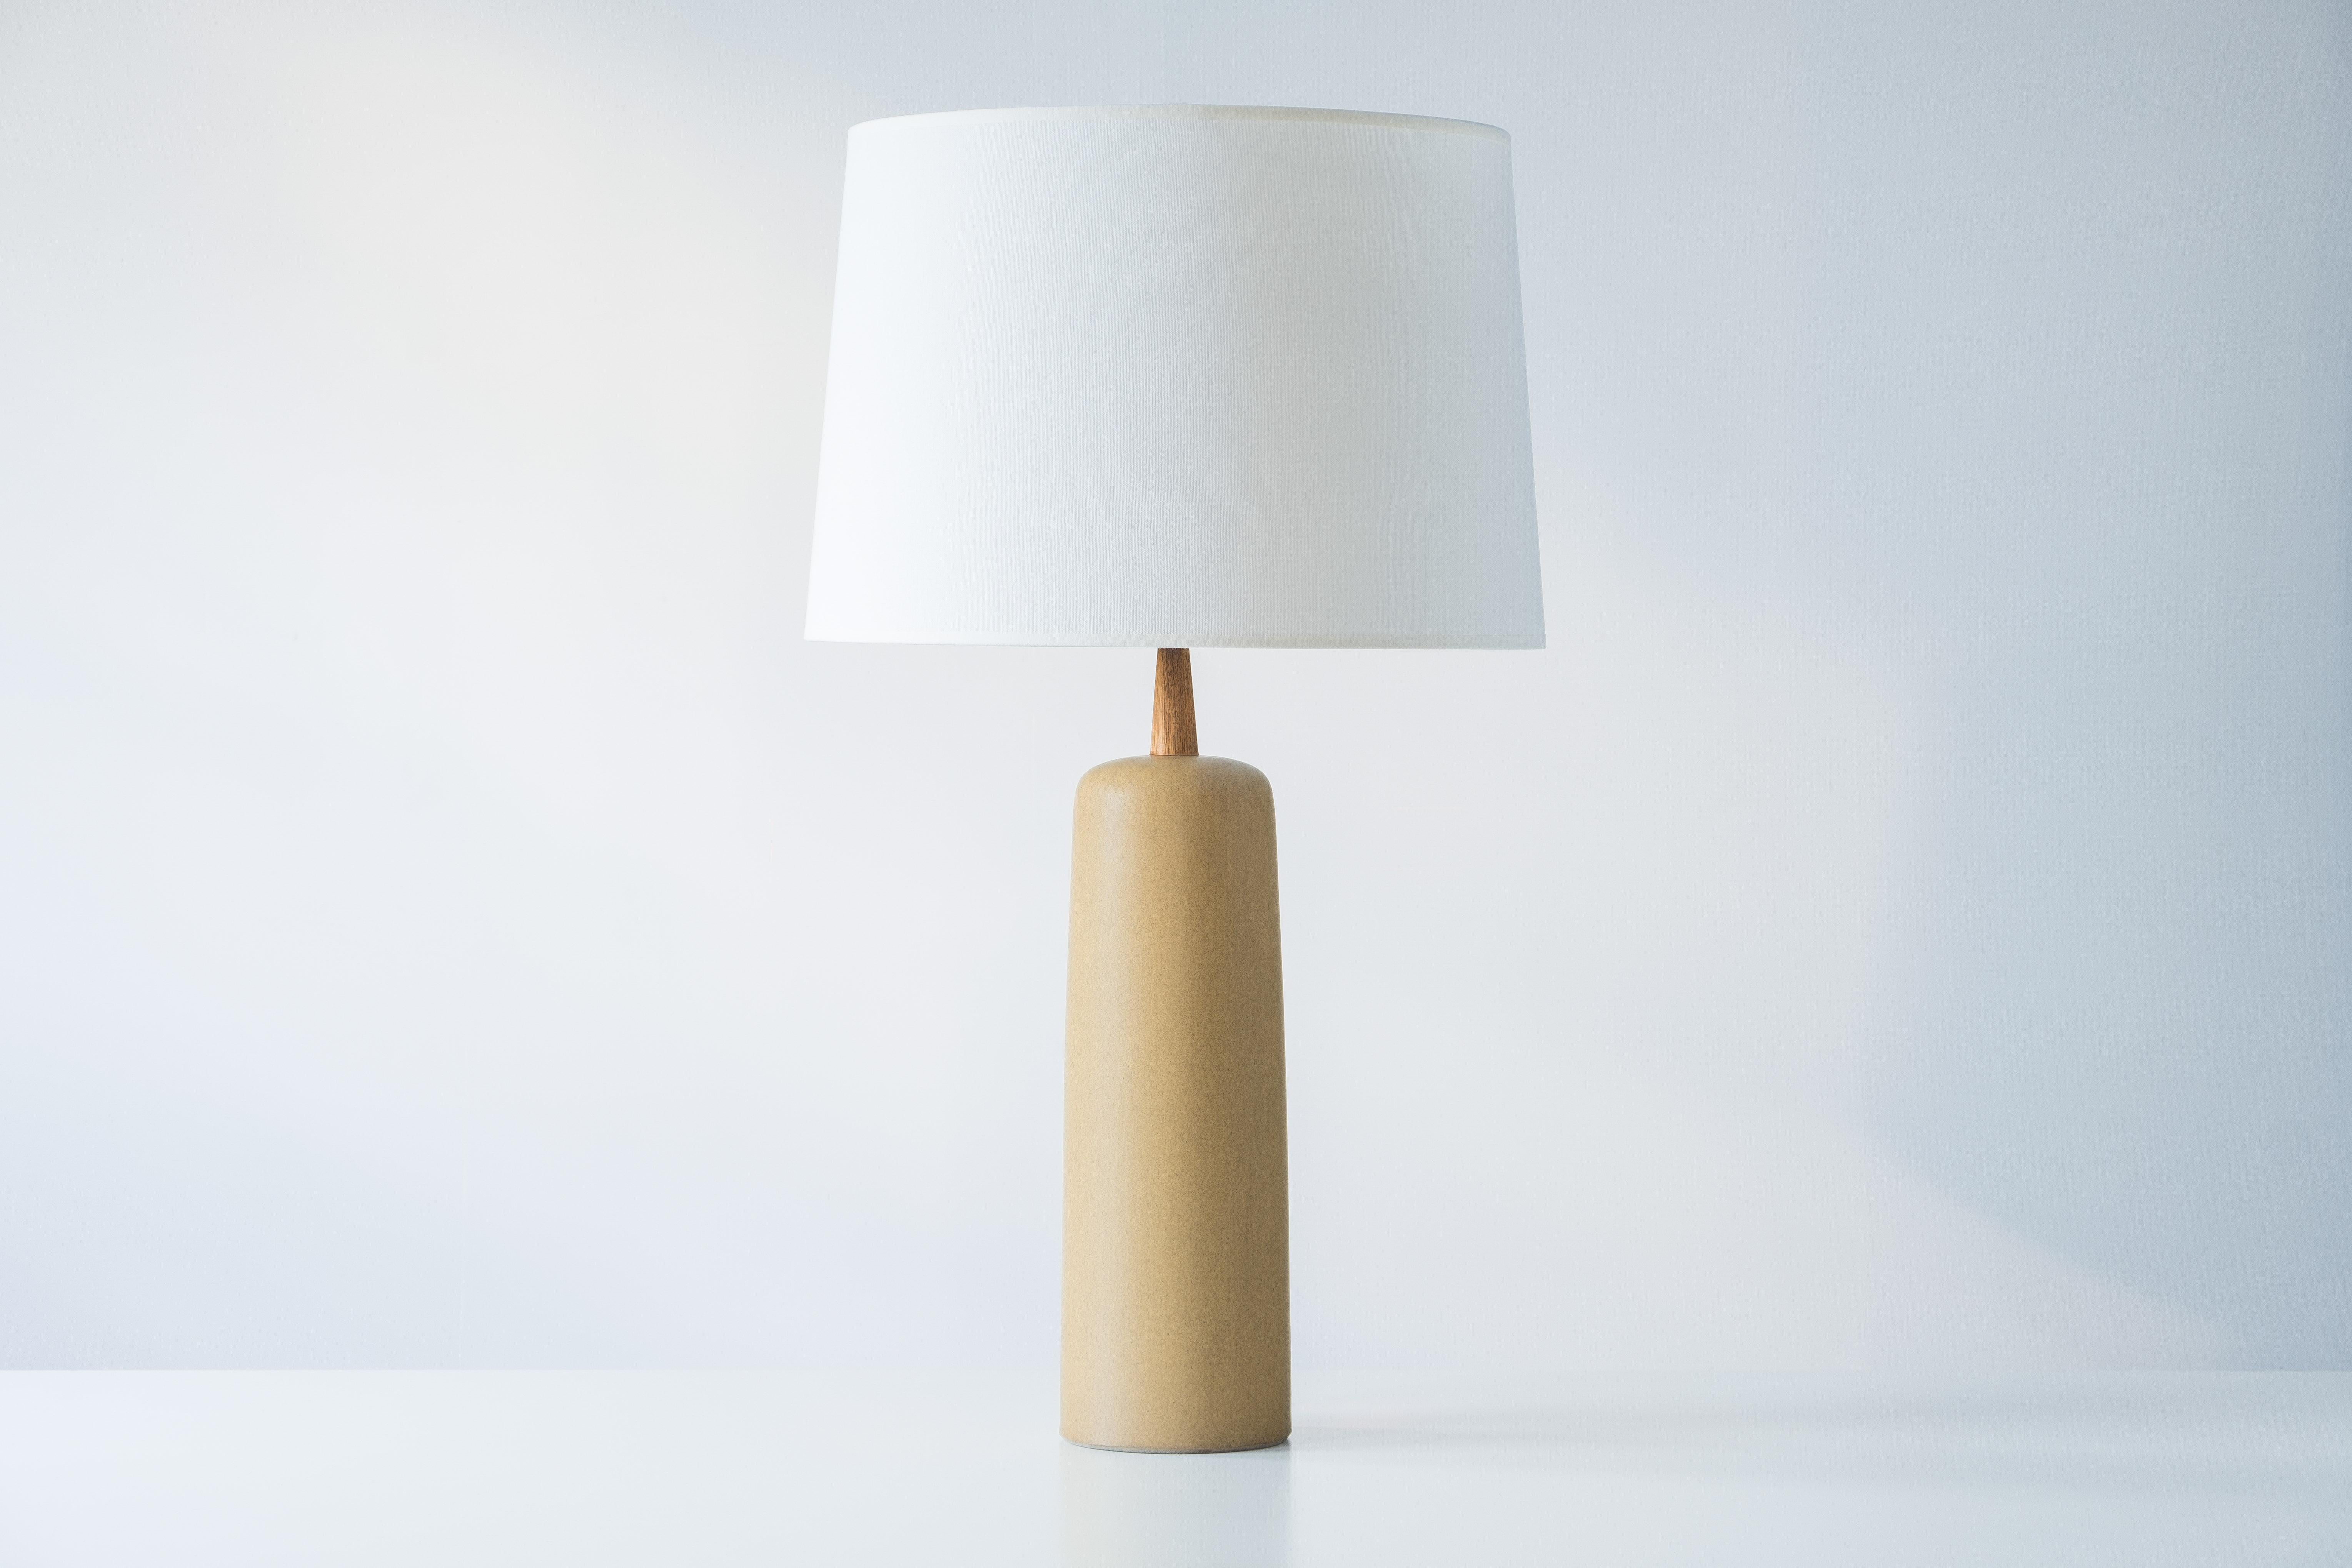 WHAT IS IT?
—
This signed Martz Model 41 lamp comes in a matte yellow ochre glaze. The overall color tone is hard to pin down, but let's call it 